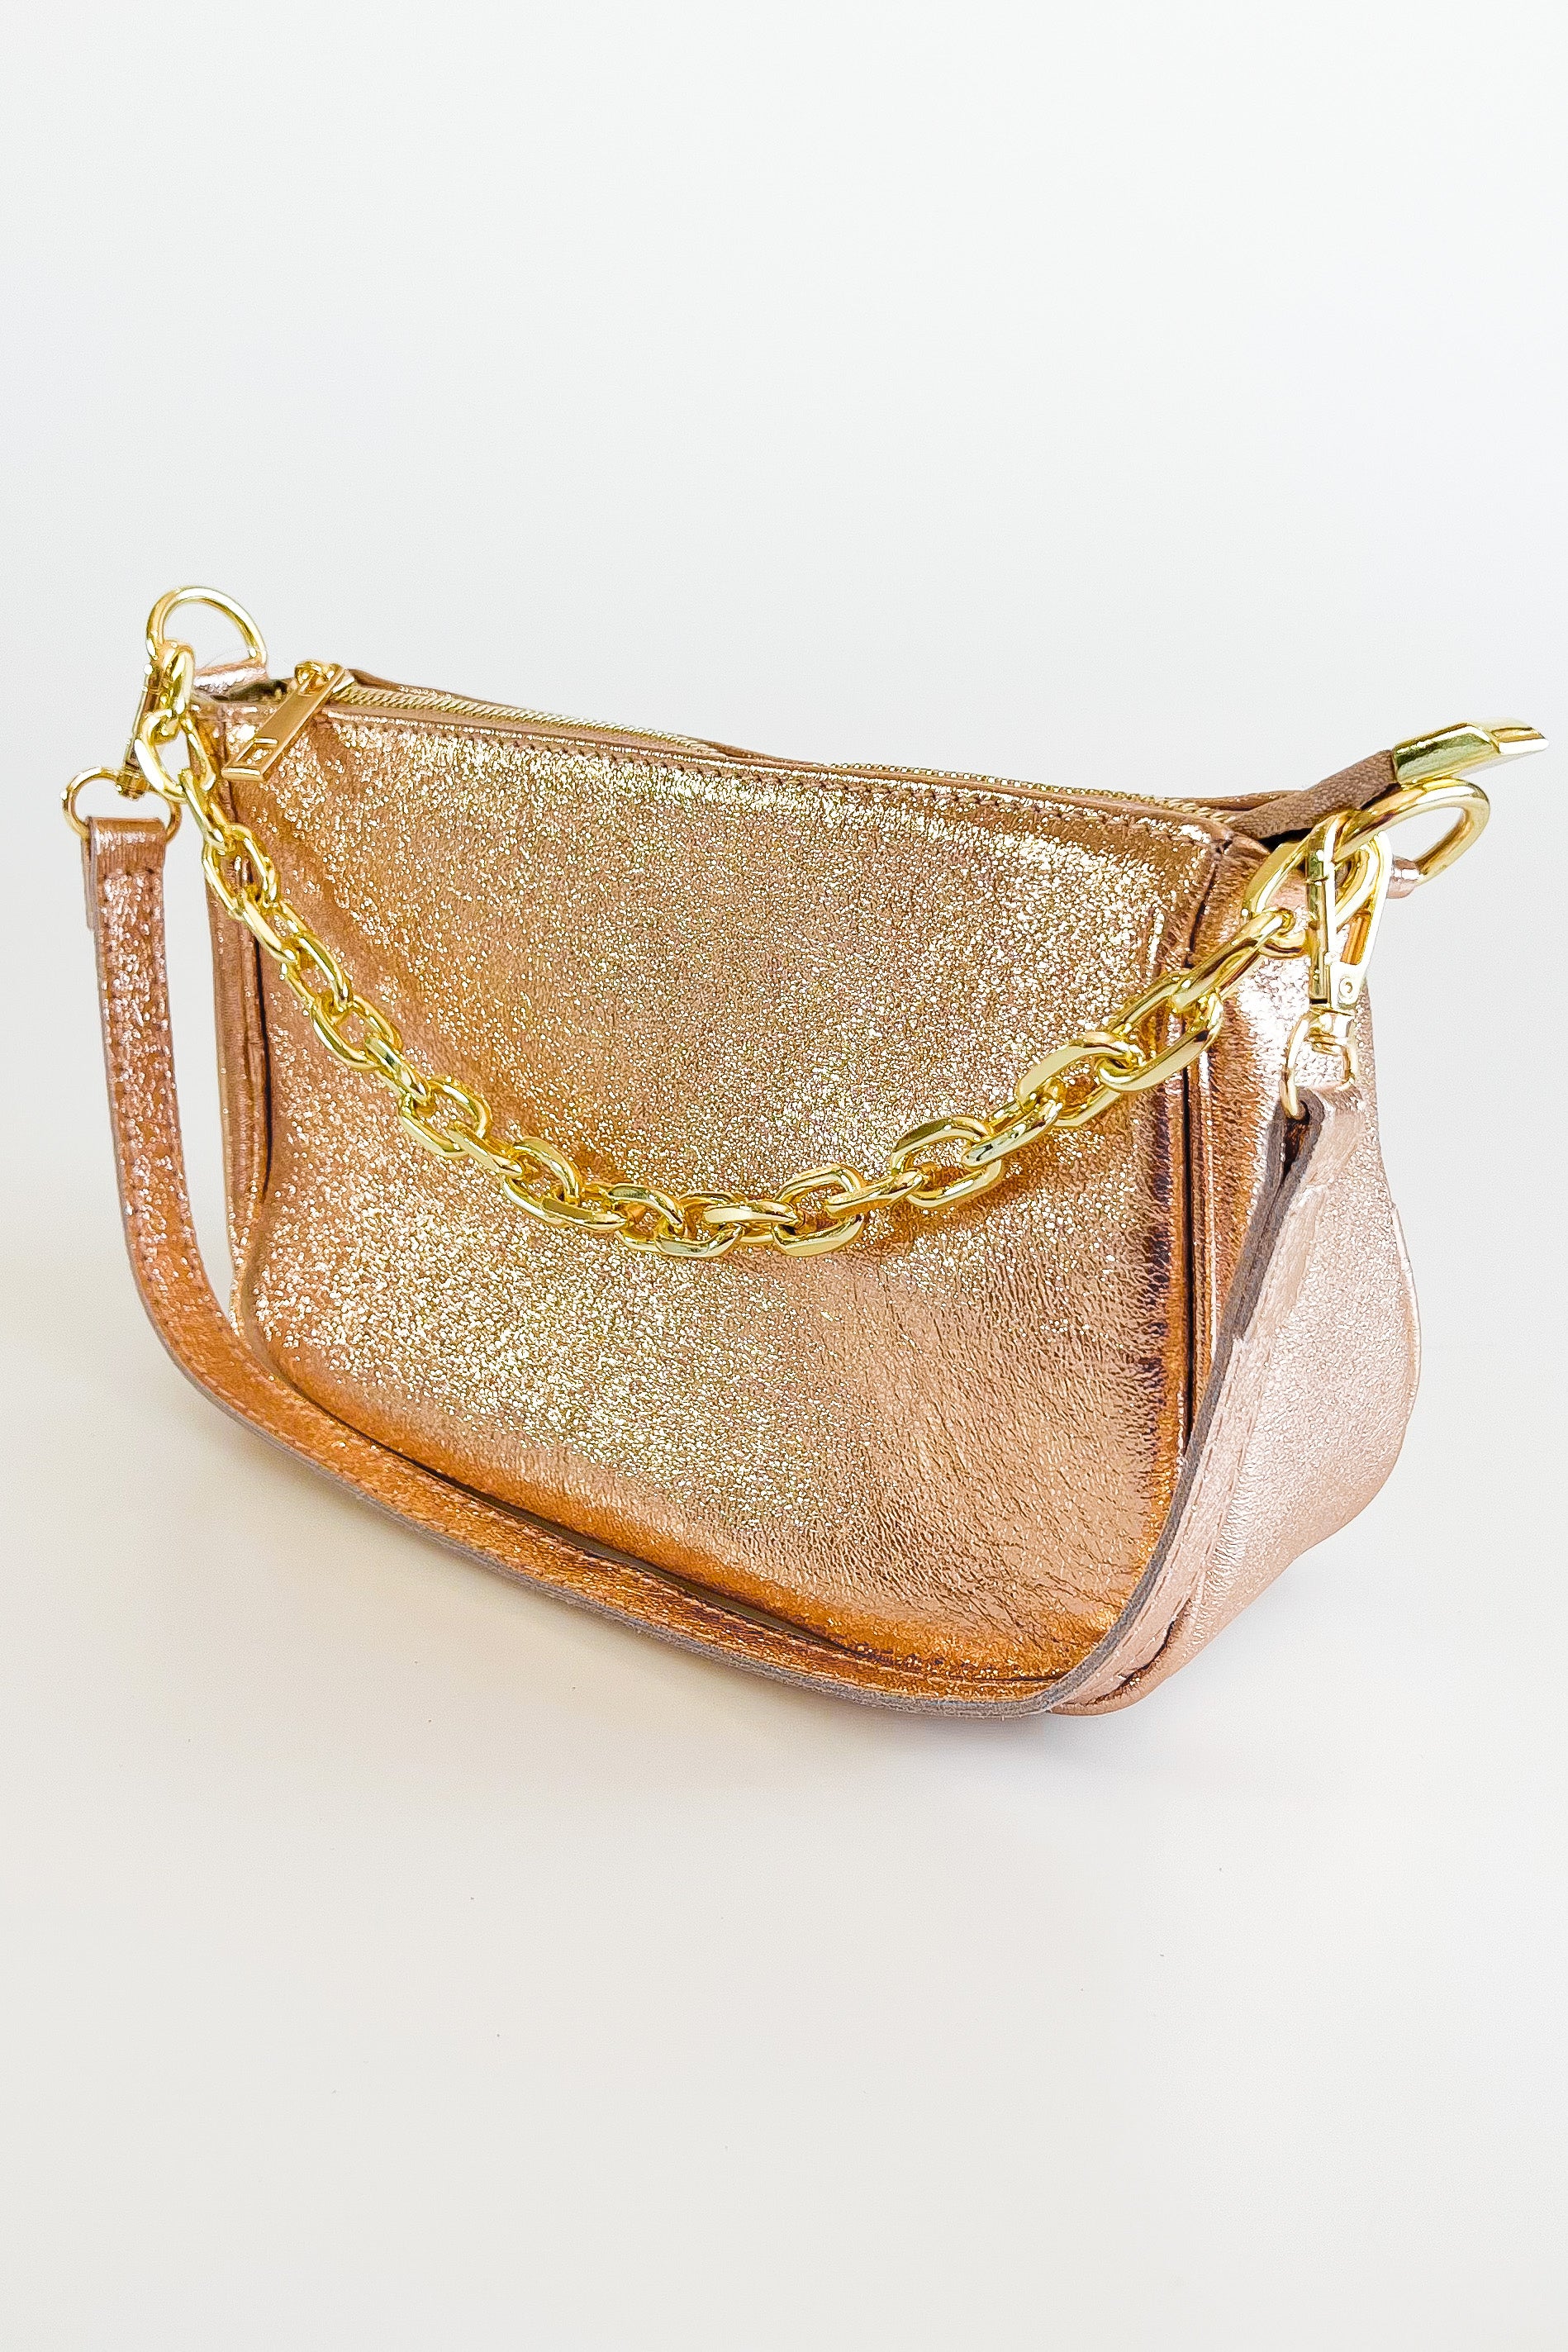 Genuine Leather Metallic Baguette Bag - Rose Gold-240 Bags-Chenson & Gorett-Coastal Bloom Boutique, find the trendiest versions of the popular styles and looks Located in Indialantic, FL